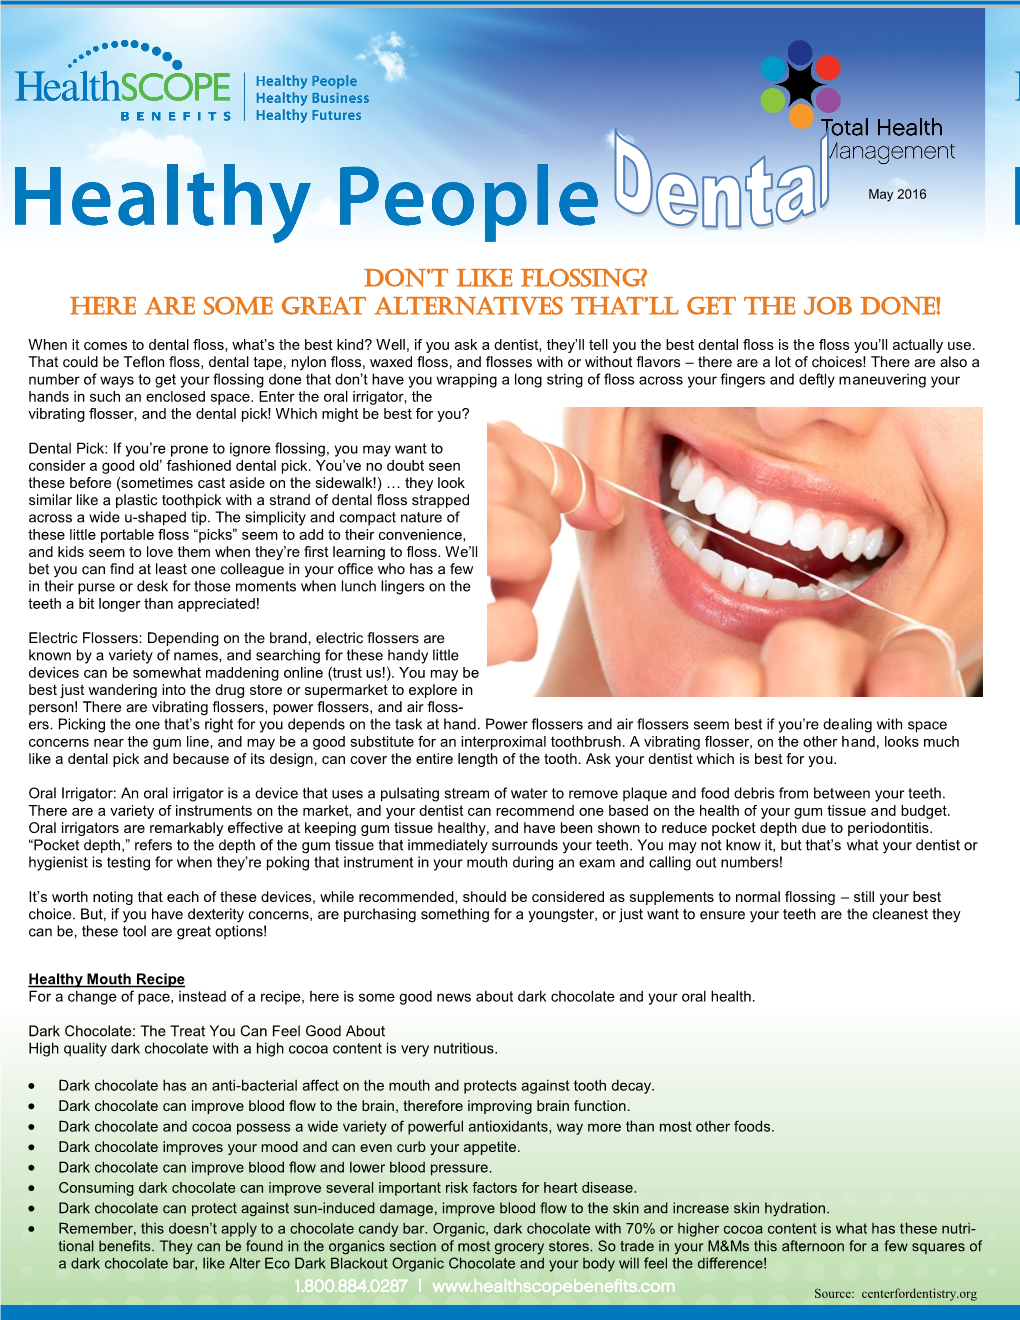 May Healthy People Dental Newsletter